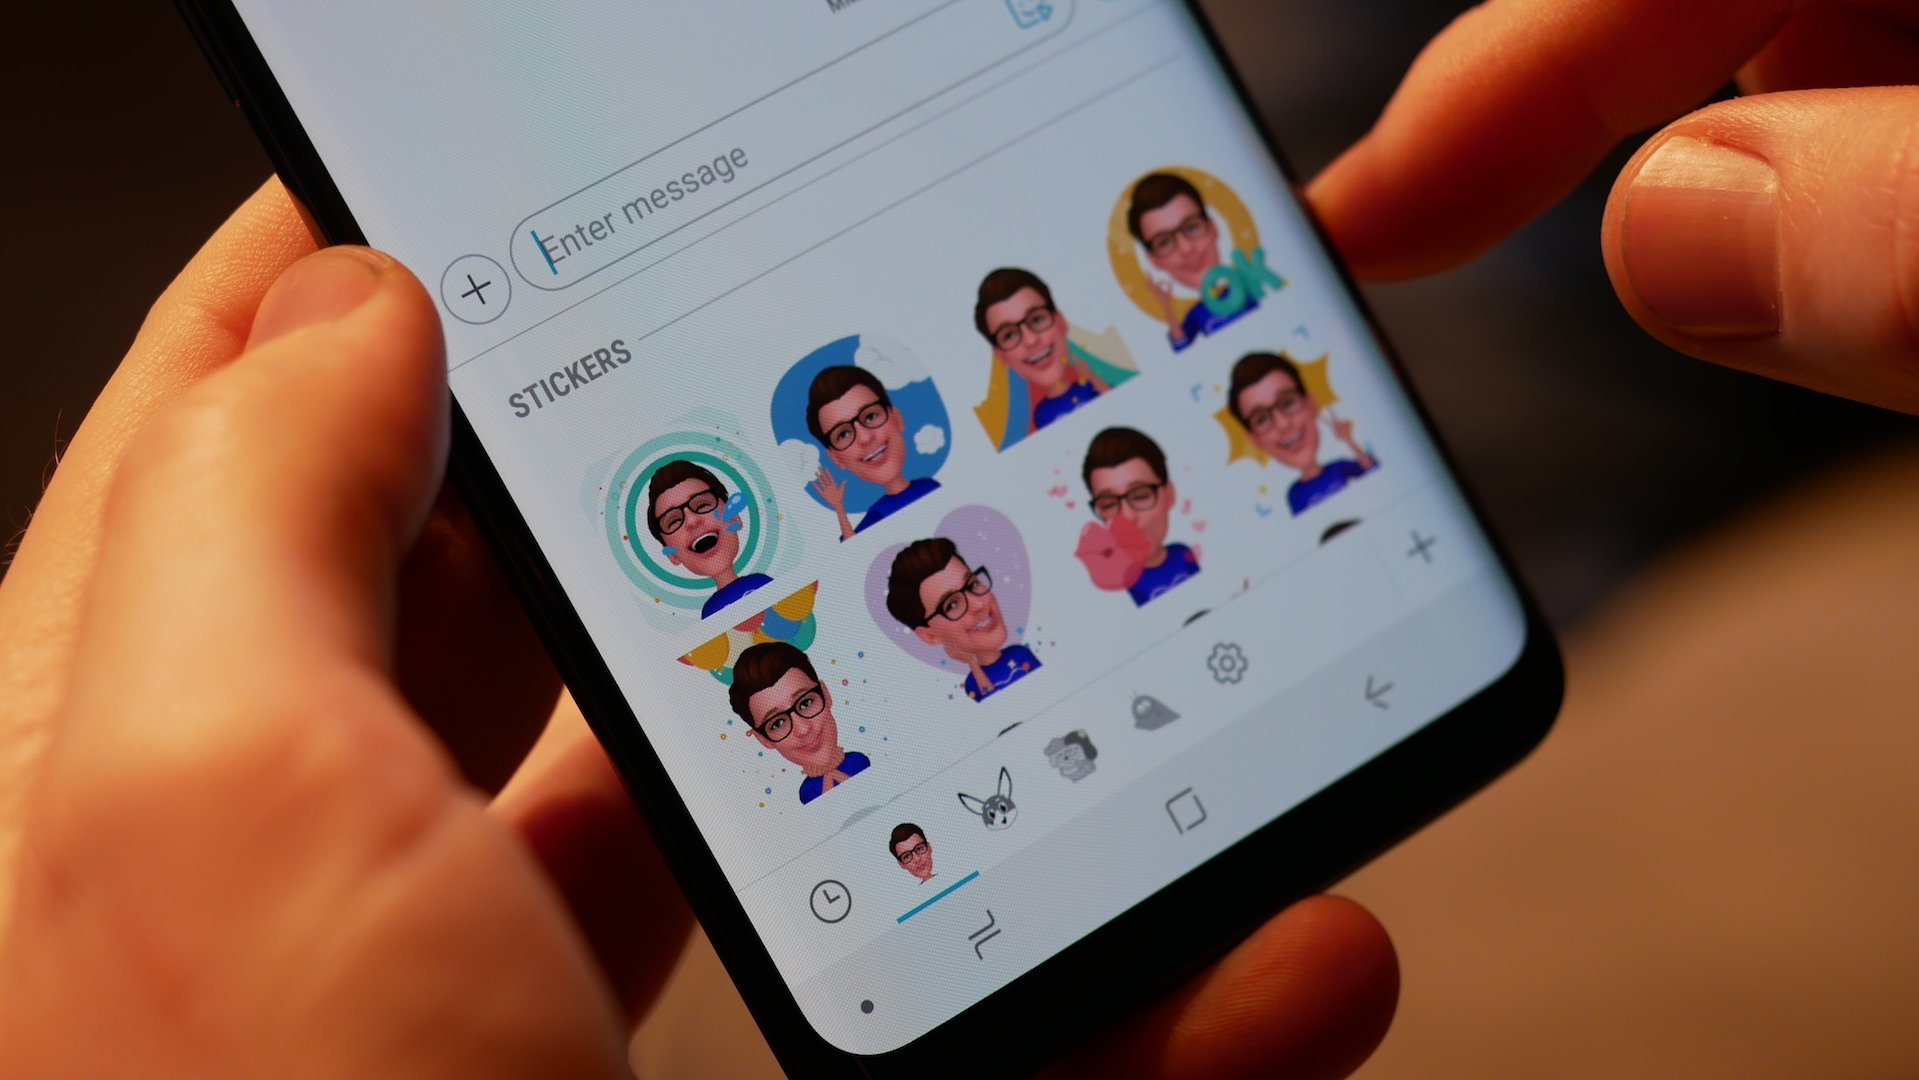 WhatsApp to soon get animated stickers based on user avatars - SamMobile